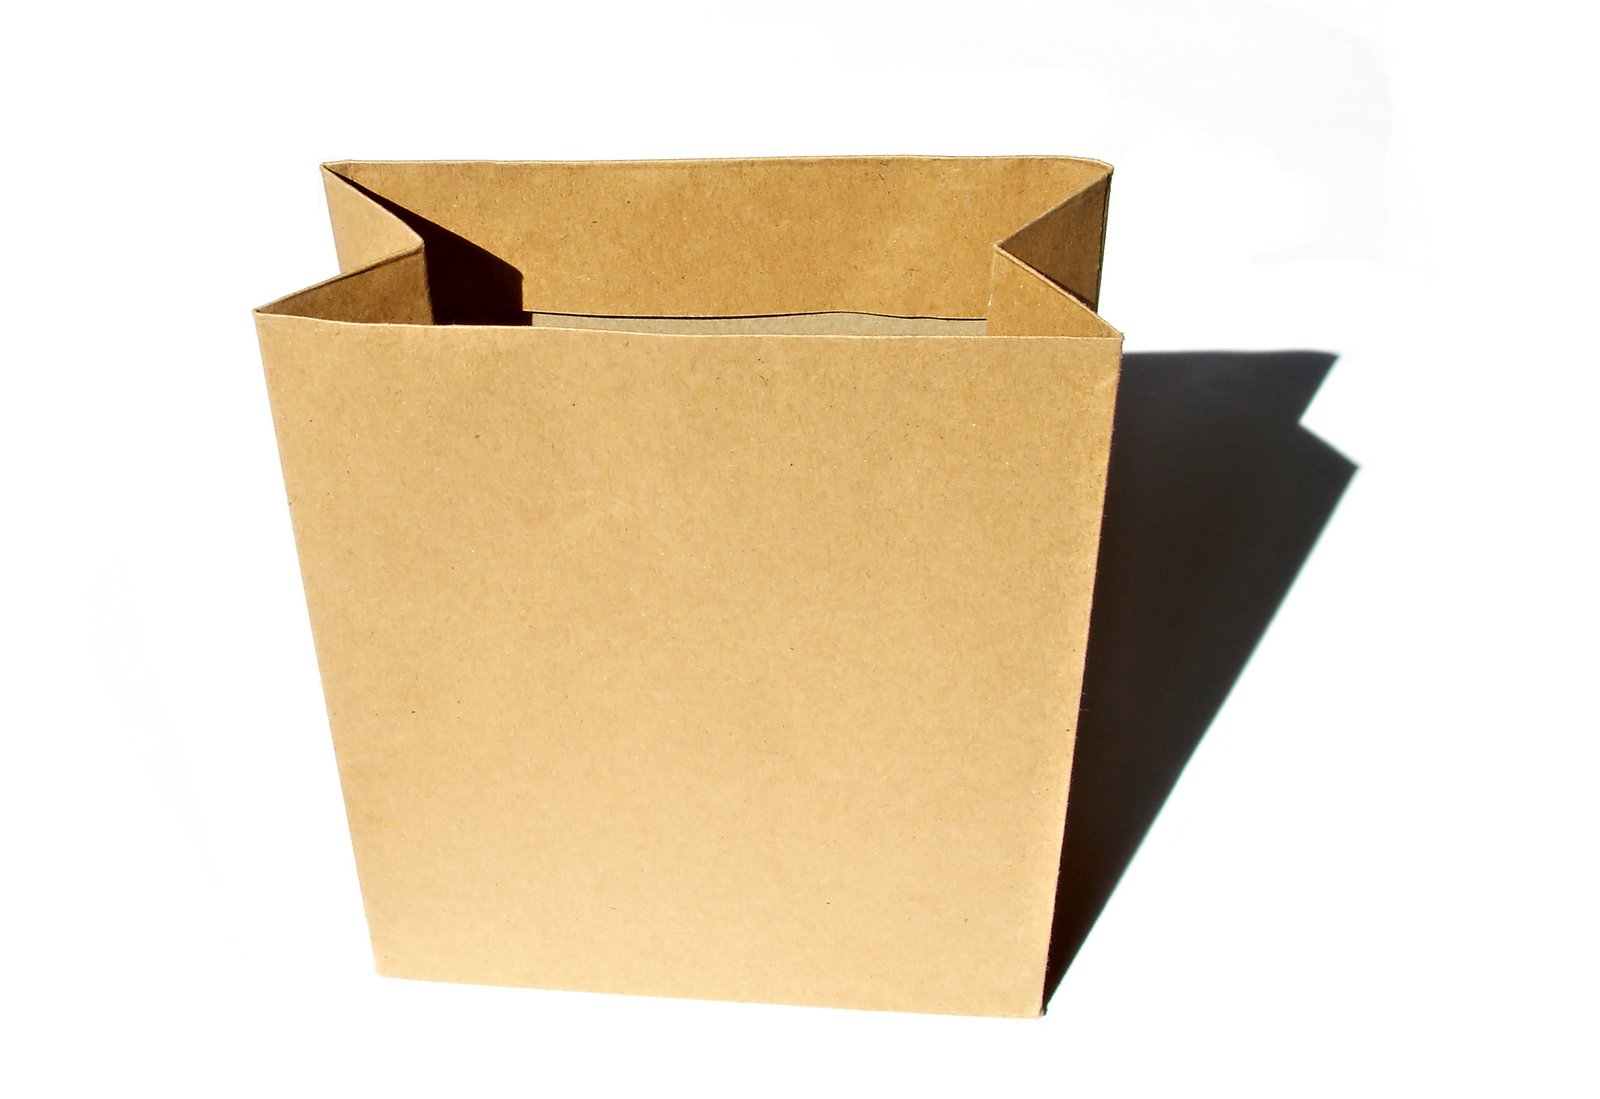 a brown box opened and showing the inner